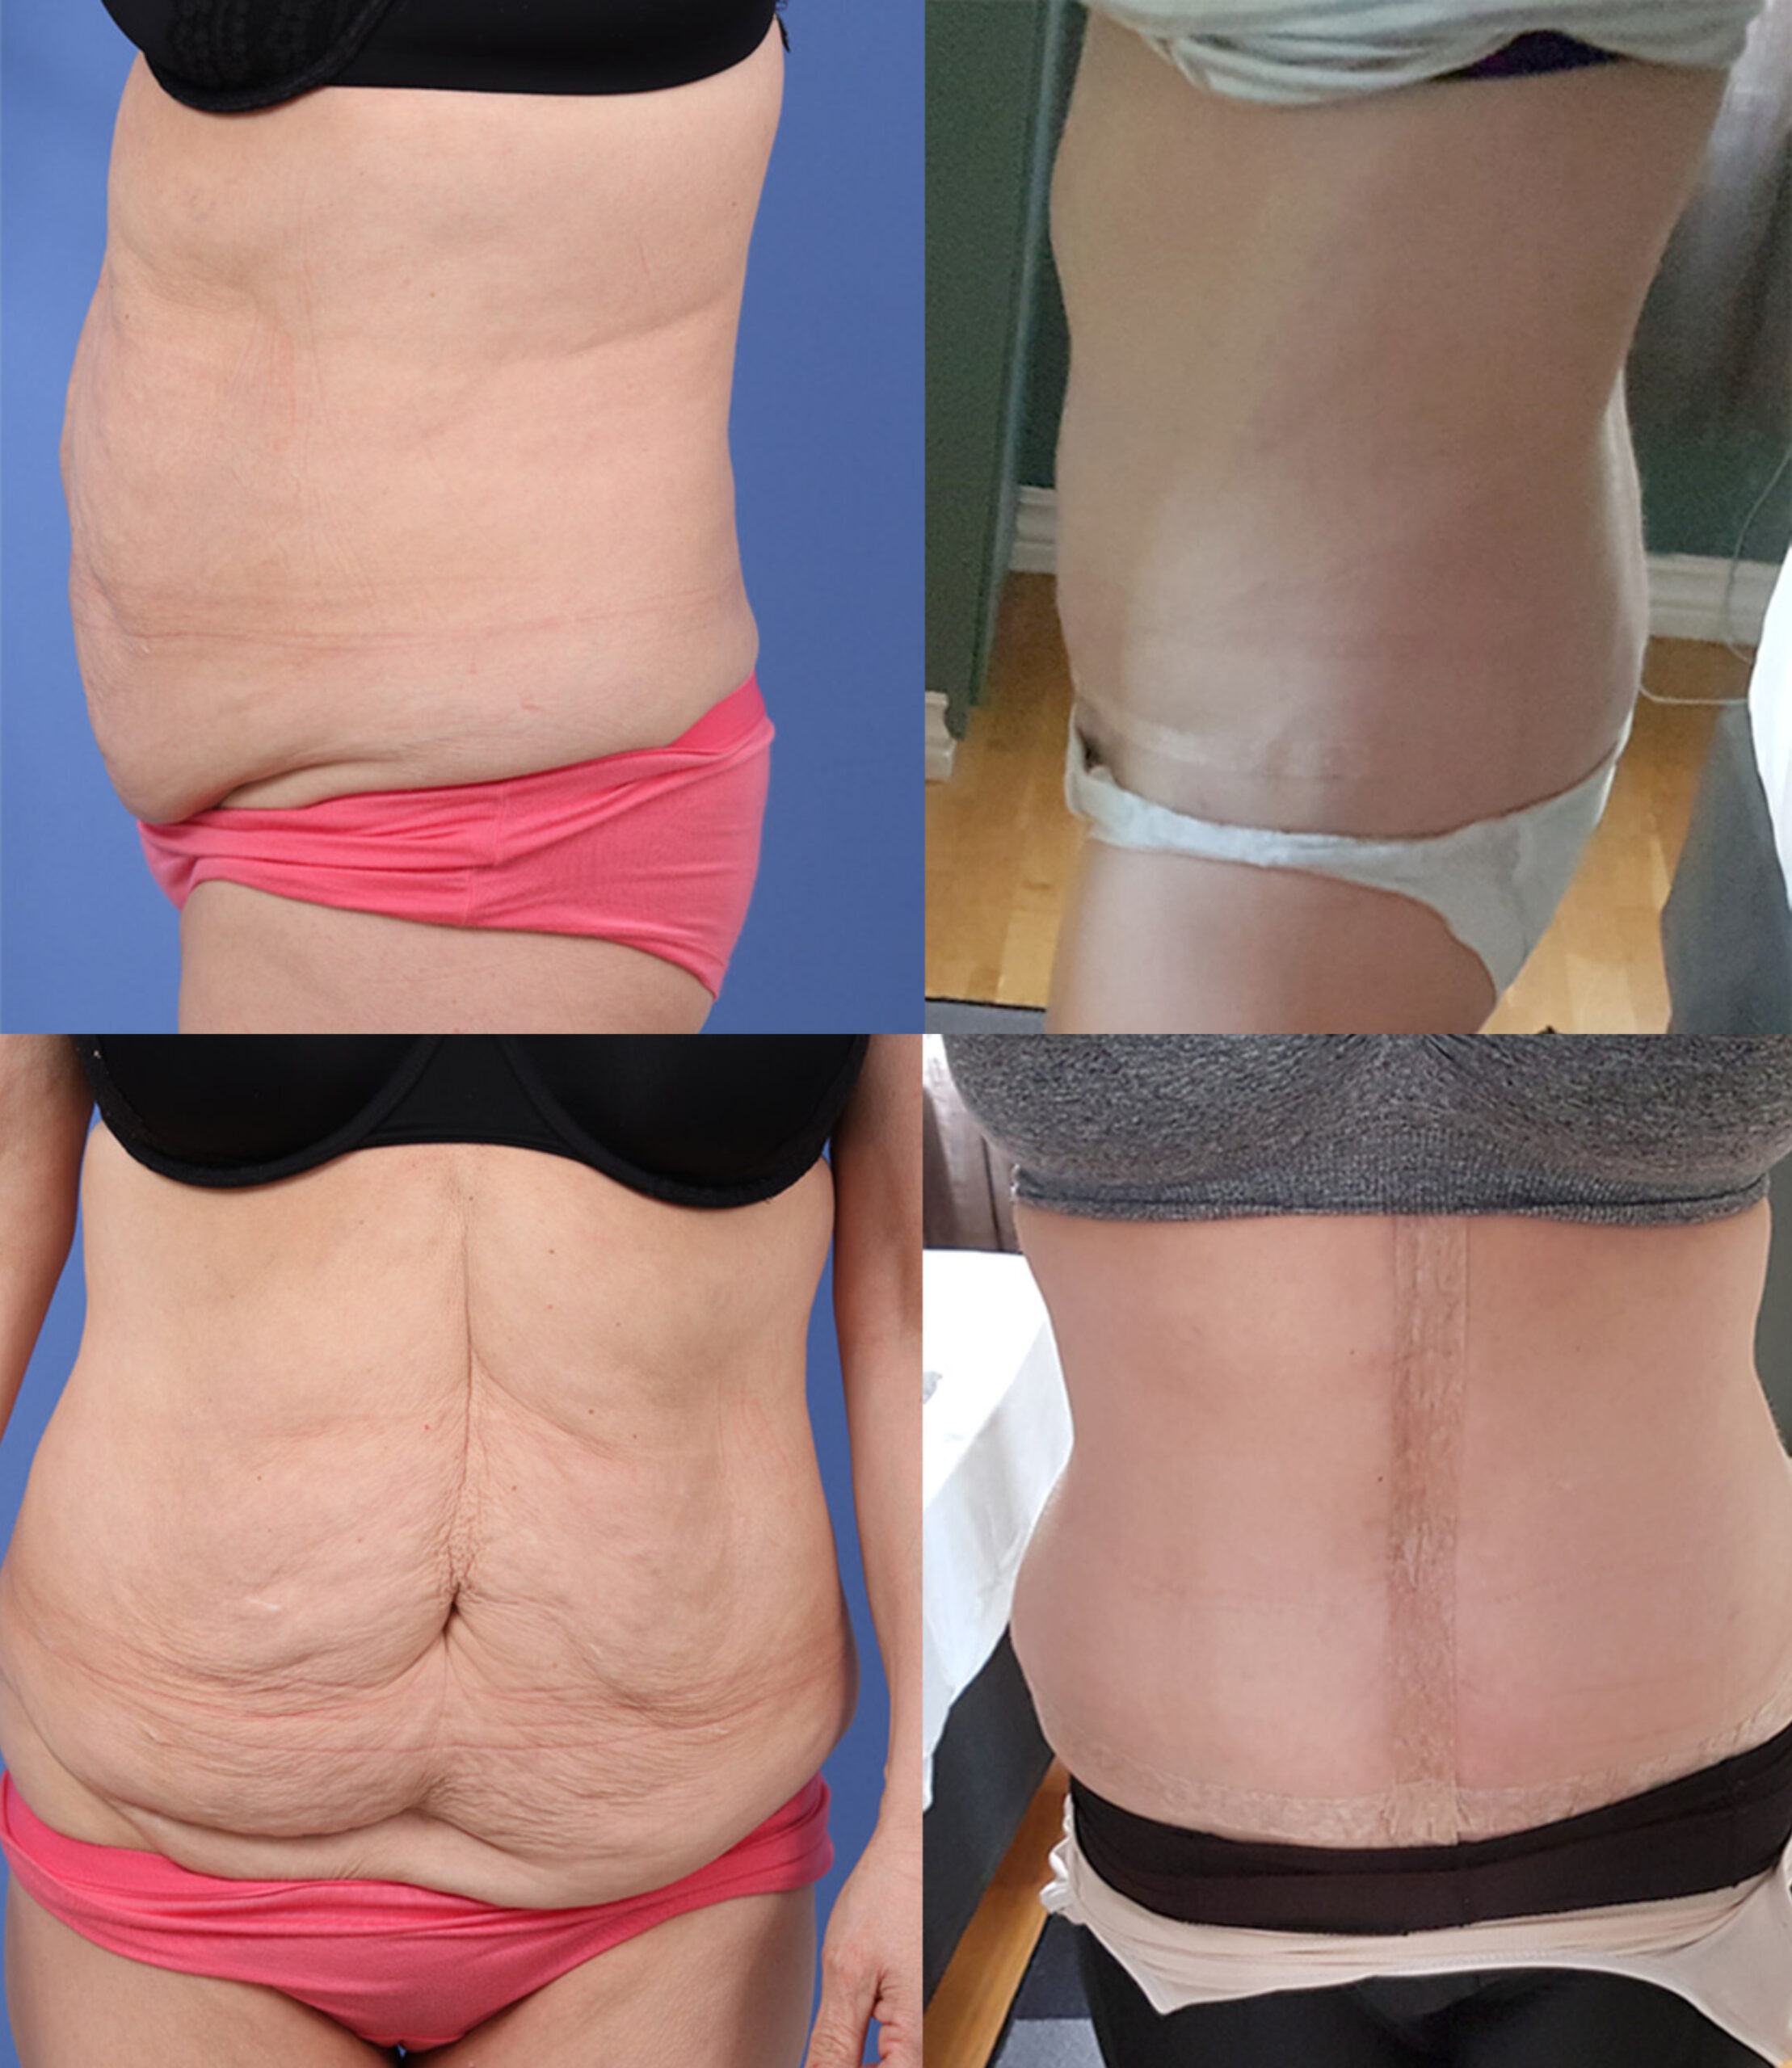 Nordesthetics clinic - The timeline for tummy tuck recovery varies